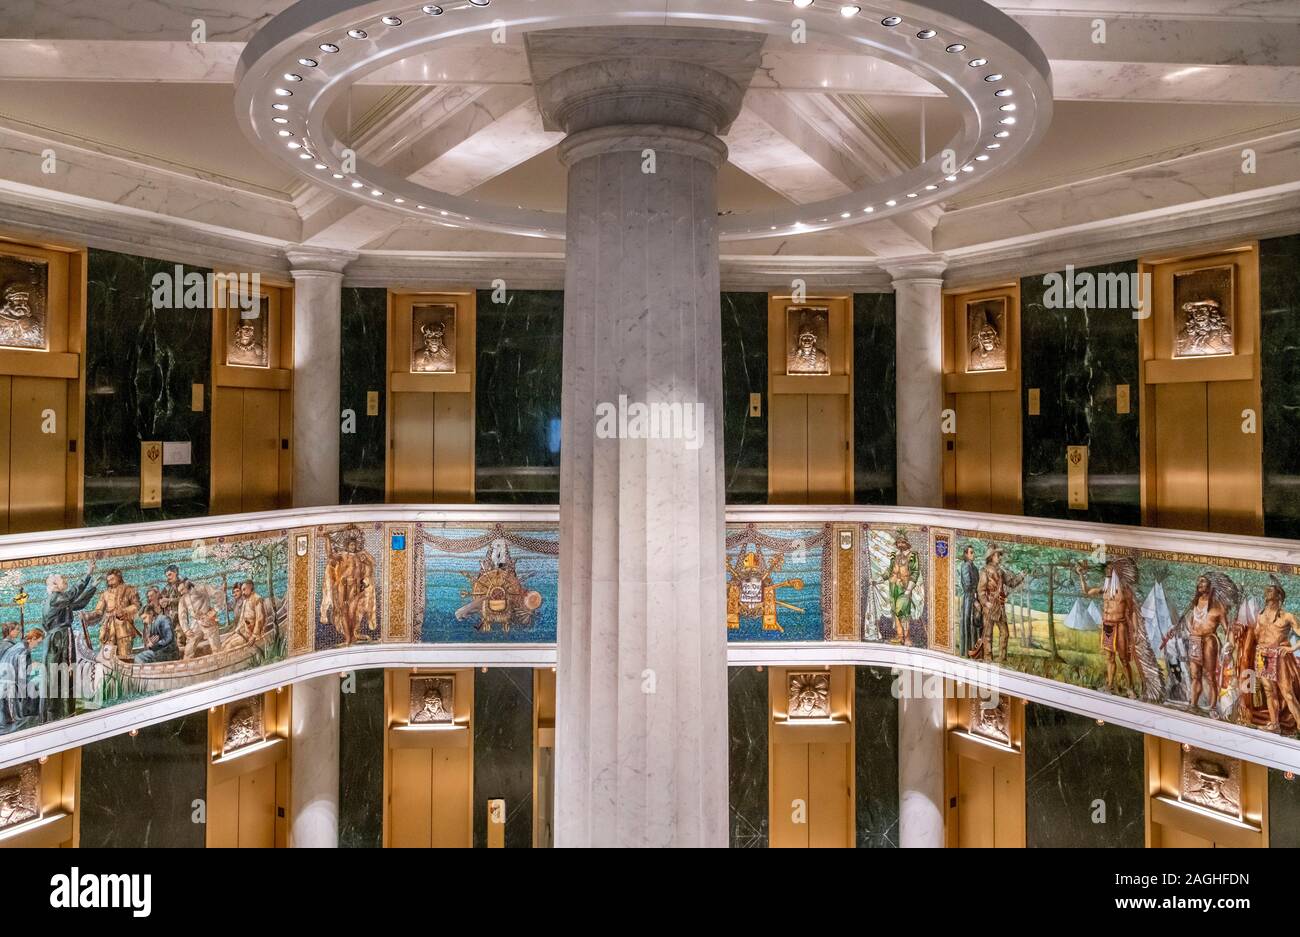 The Lobby of the Marquette Building, a historic landmark in the 'Chicago School' style, S Dearborn St, Chicago Illinois, USA. The lobby is decorated with a mosaic frieze by the Tiffany studio depicting events in the life of Jacques Marquette. Stock Photo